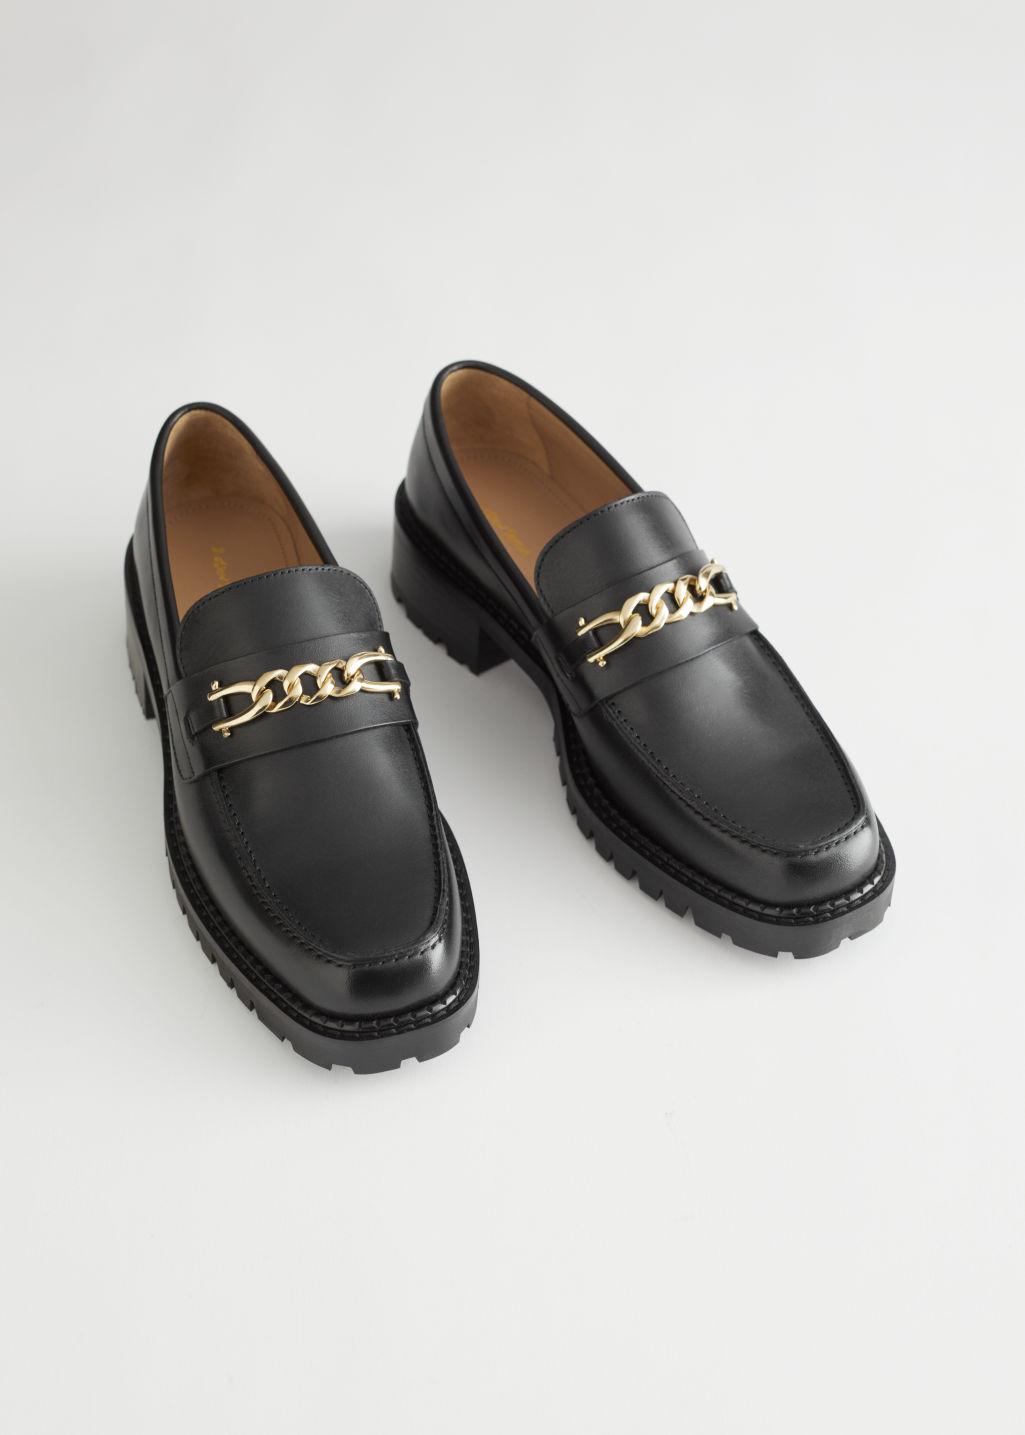 & Other Stories Rope Chain Leather Loafers in Black | Lyst